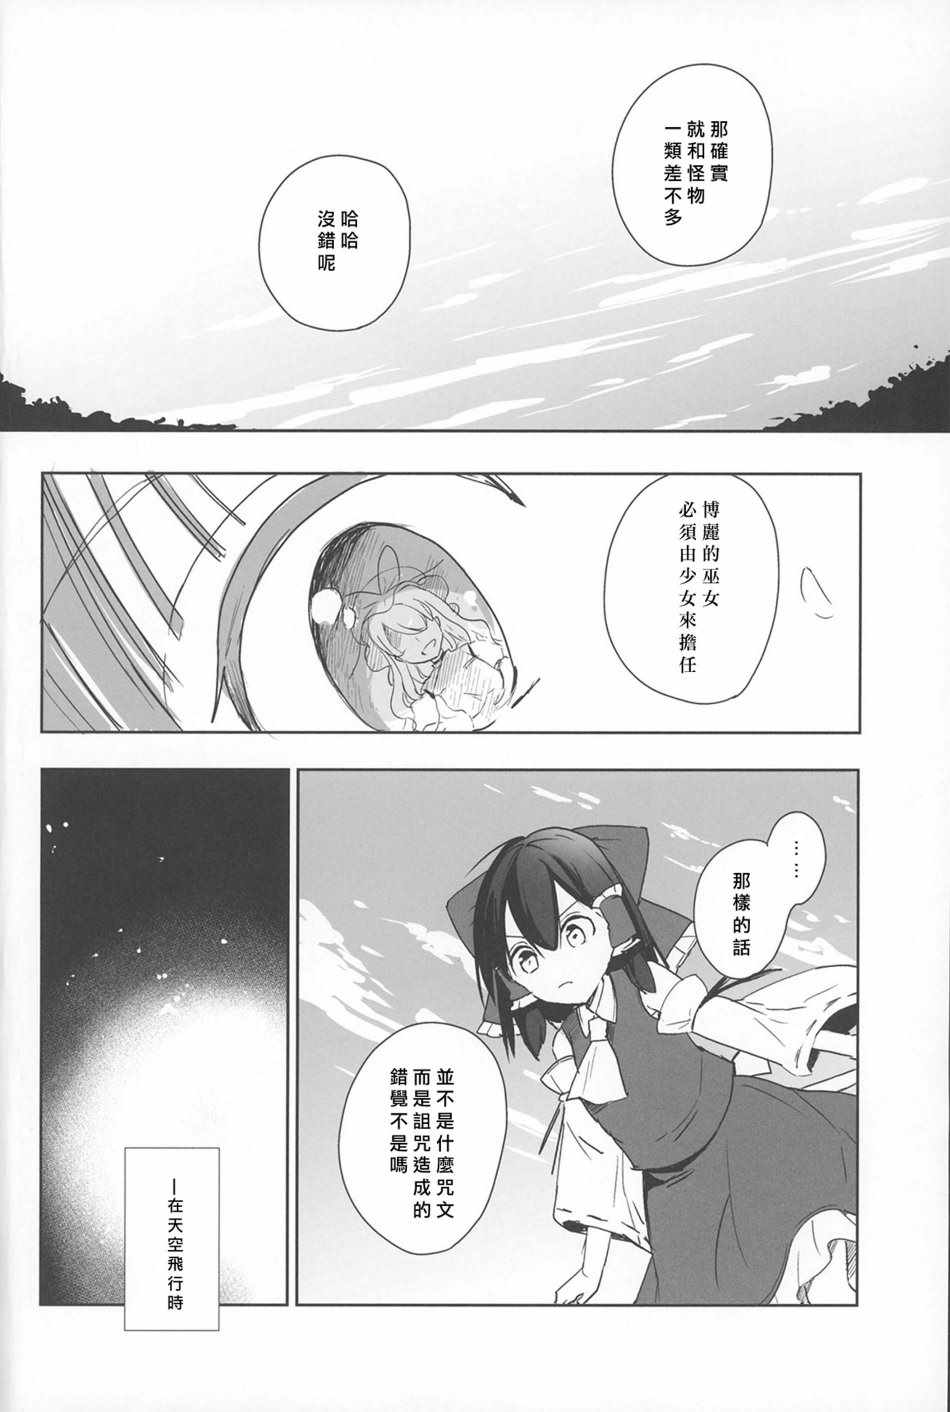 《LOST GIRL·LOST LADY》漫画 LOST GIRL LOST LADY 001话